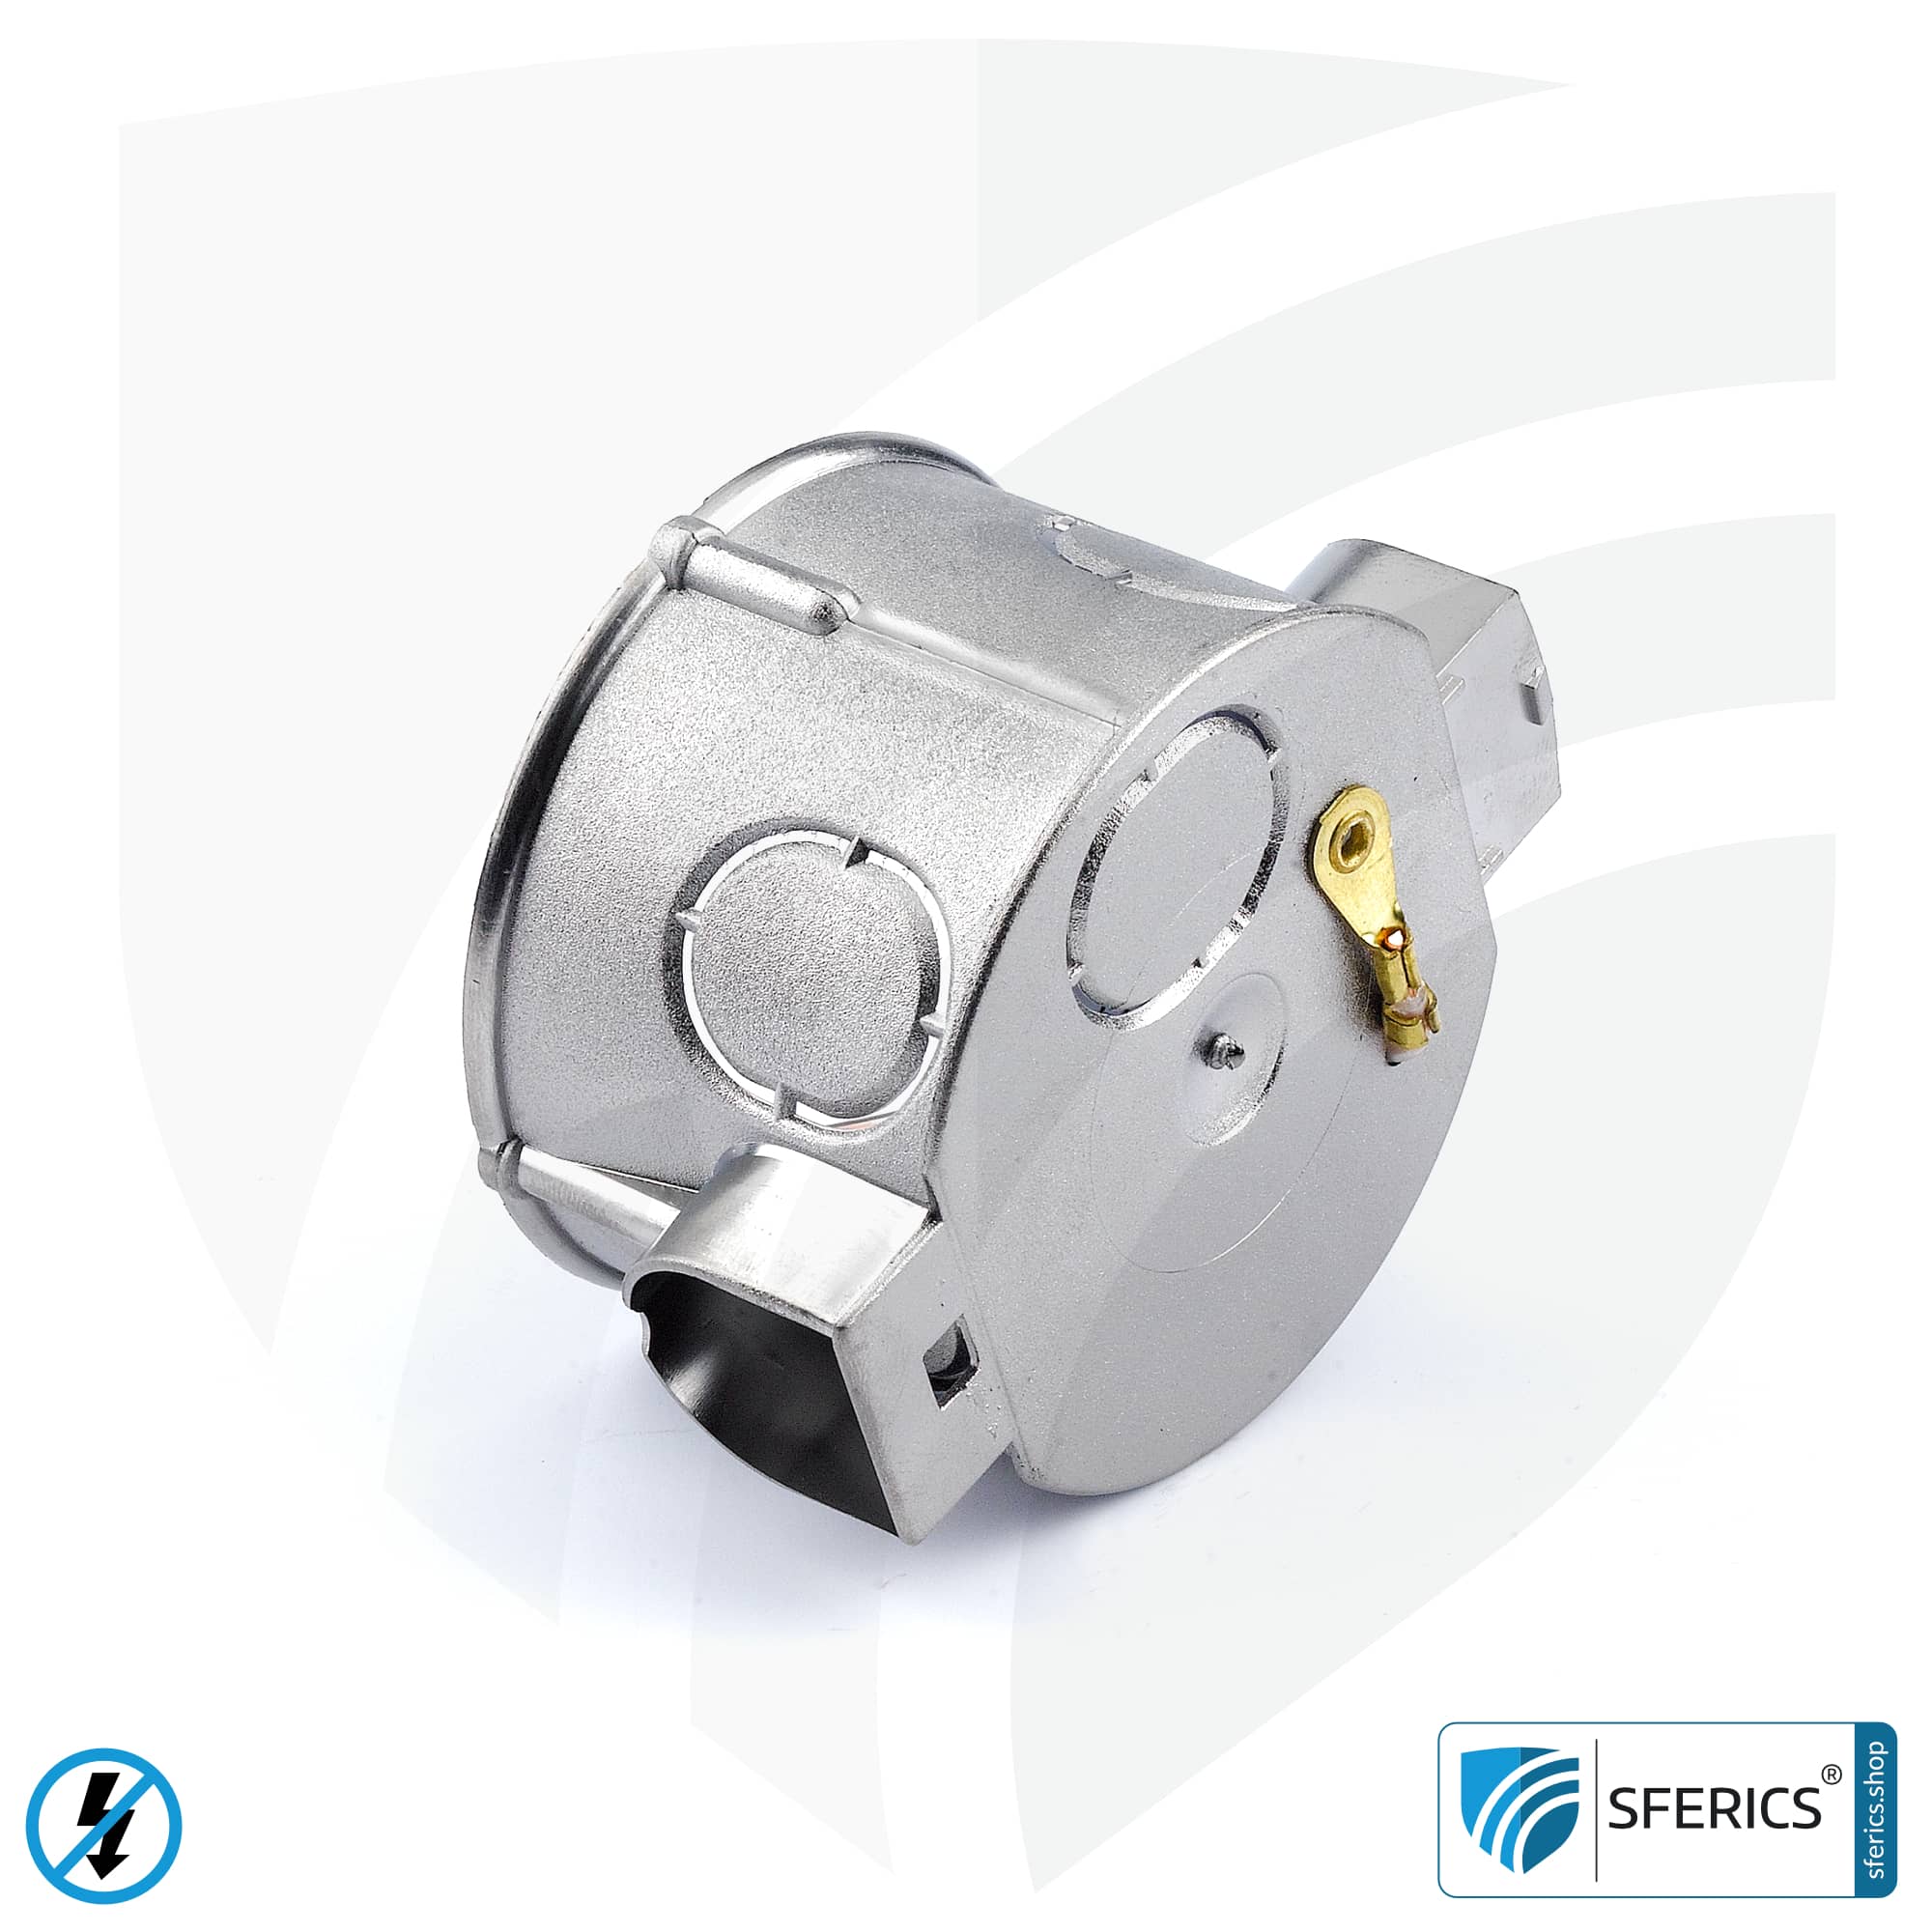 Shielded in-wall box, deep | 41mm depth | flush-mounted installation box, as junction box or switch box